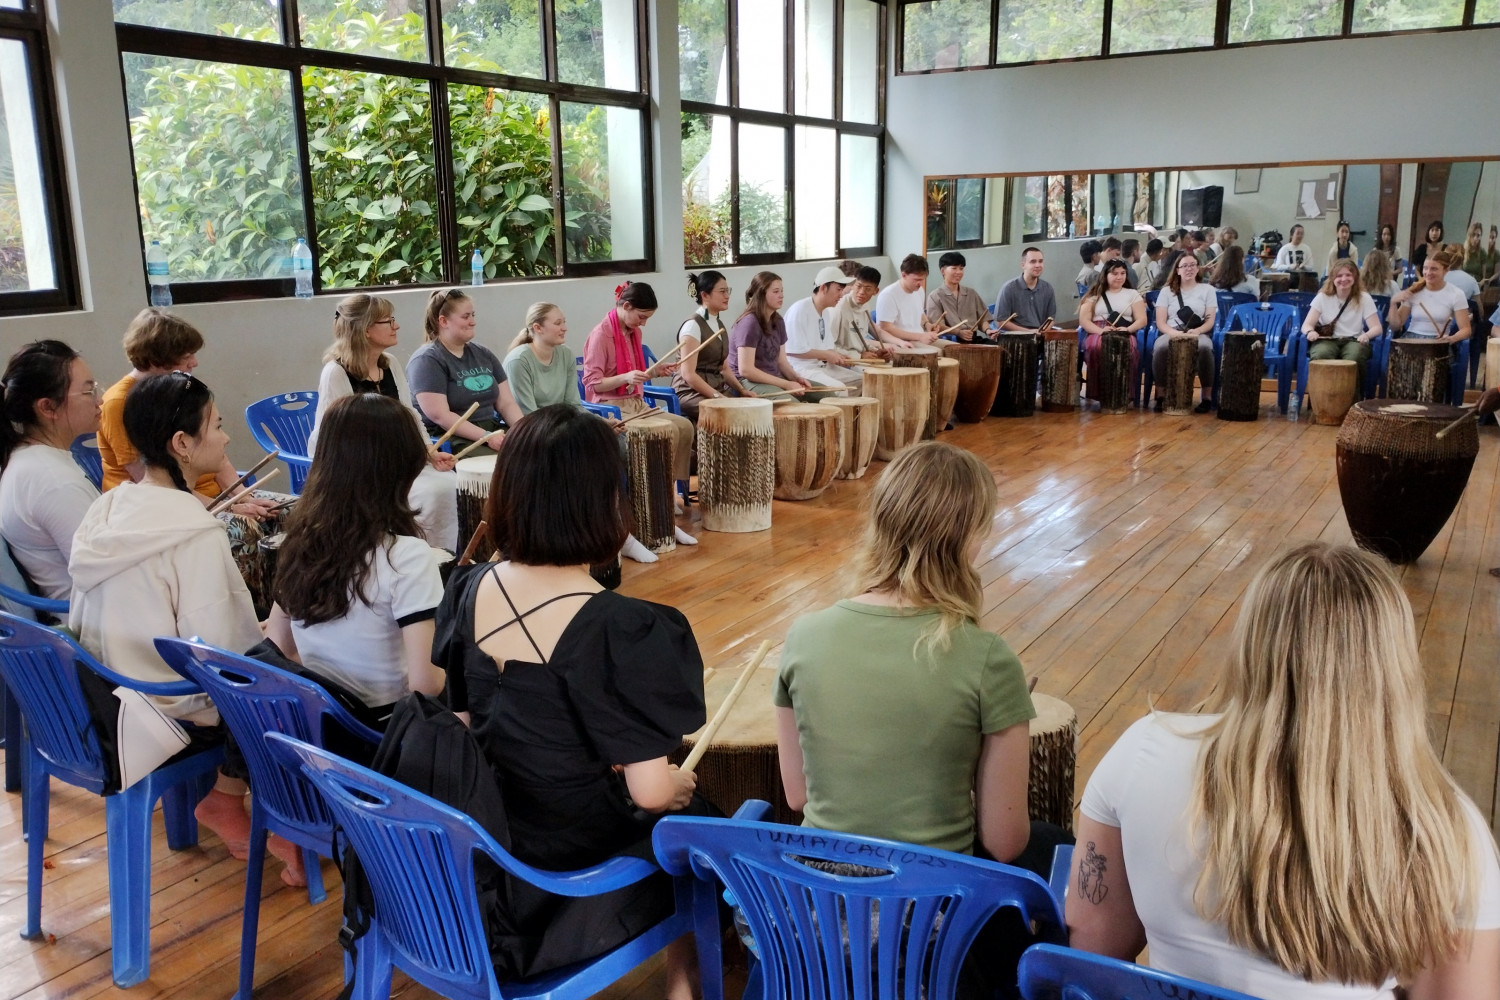 Students participating in a drum circle.